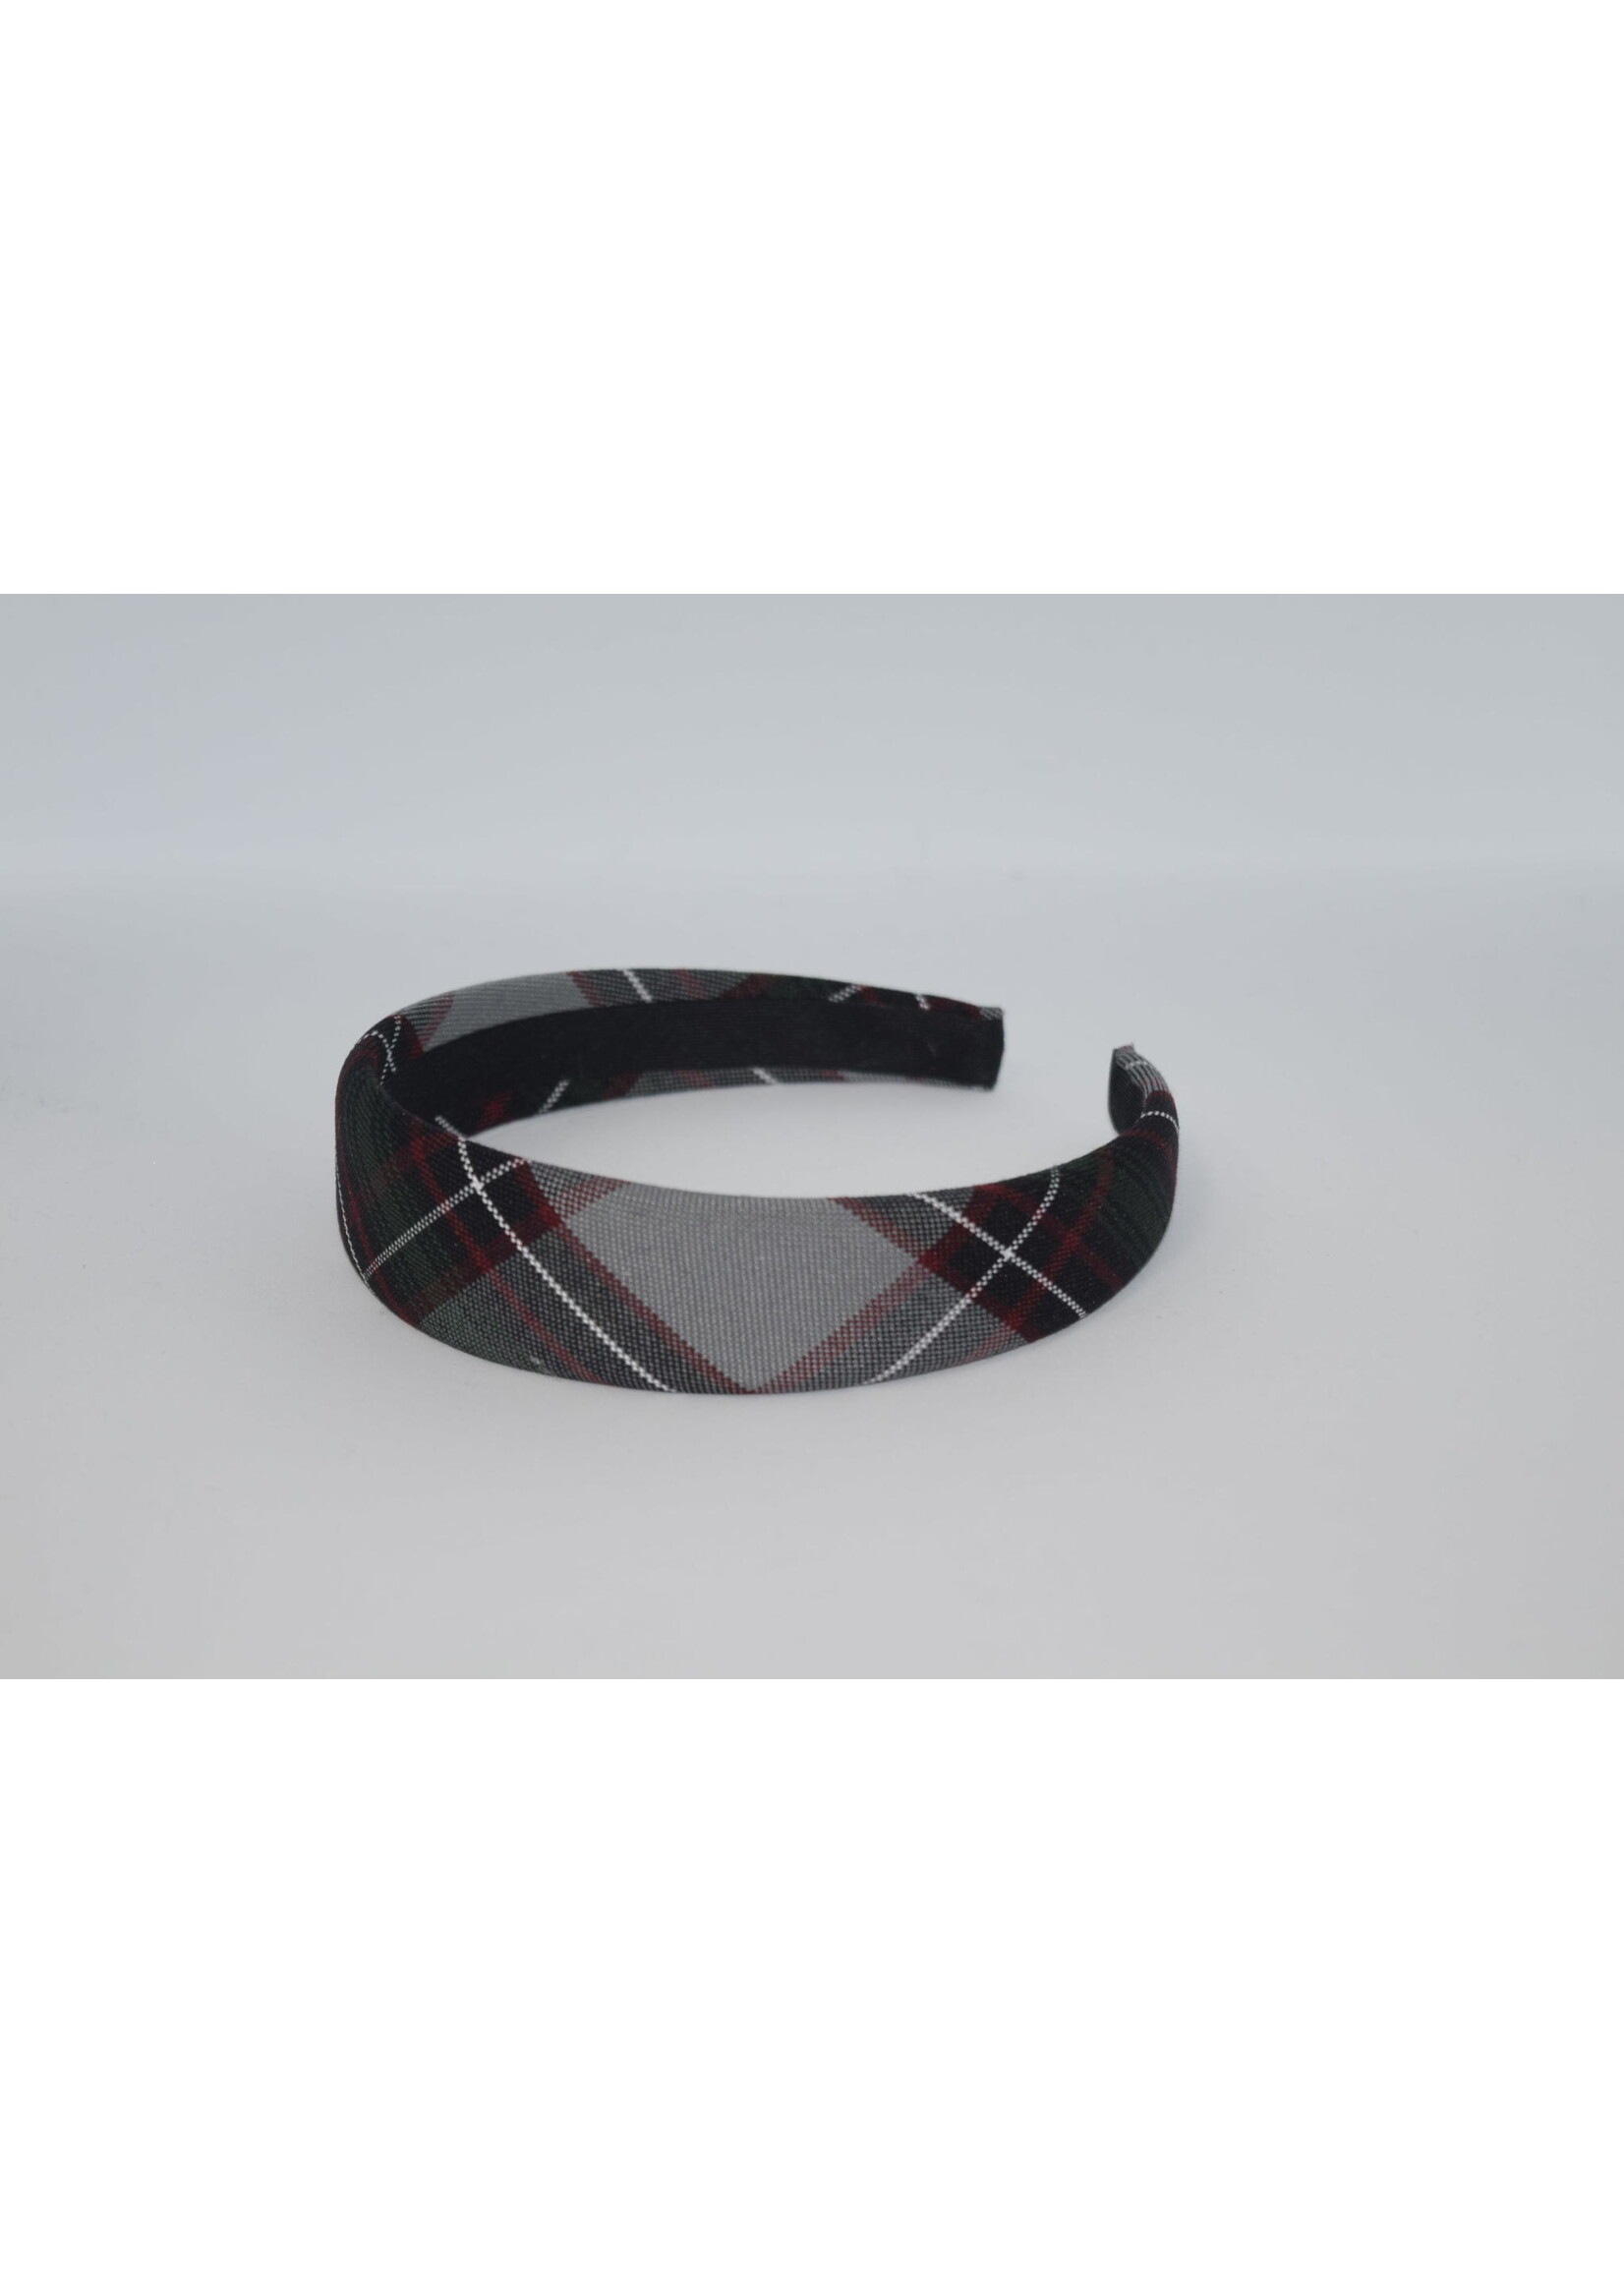 Wide padded headband w/out metal tips P26